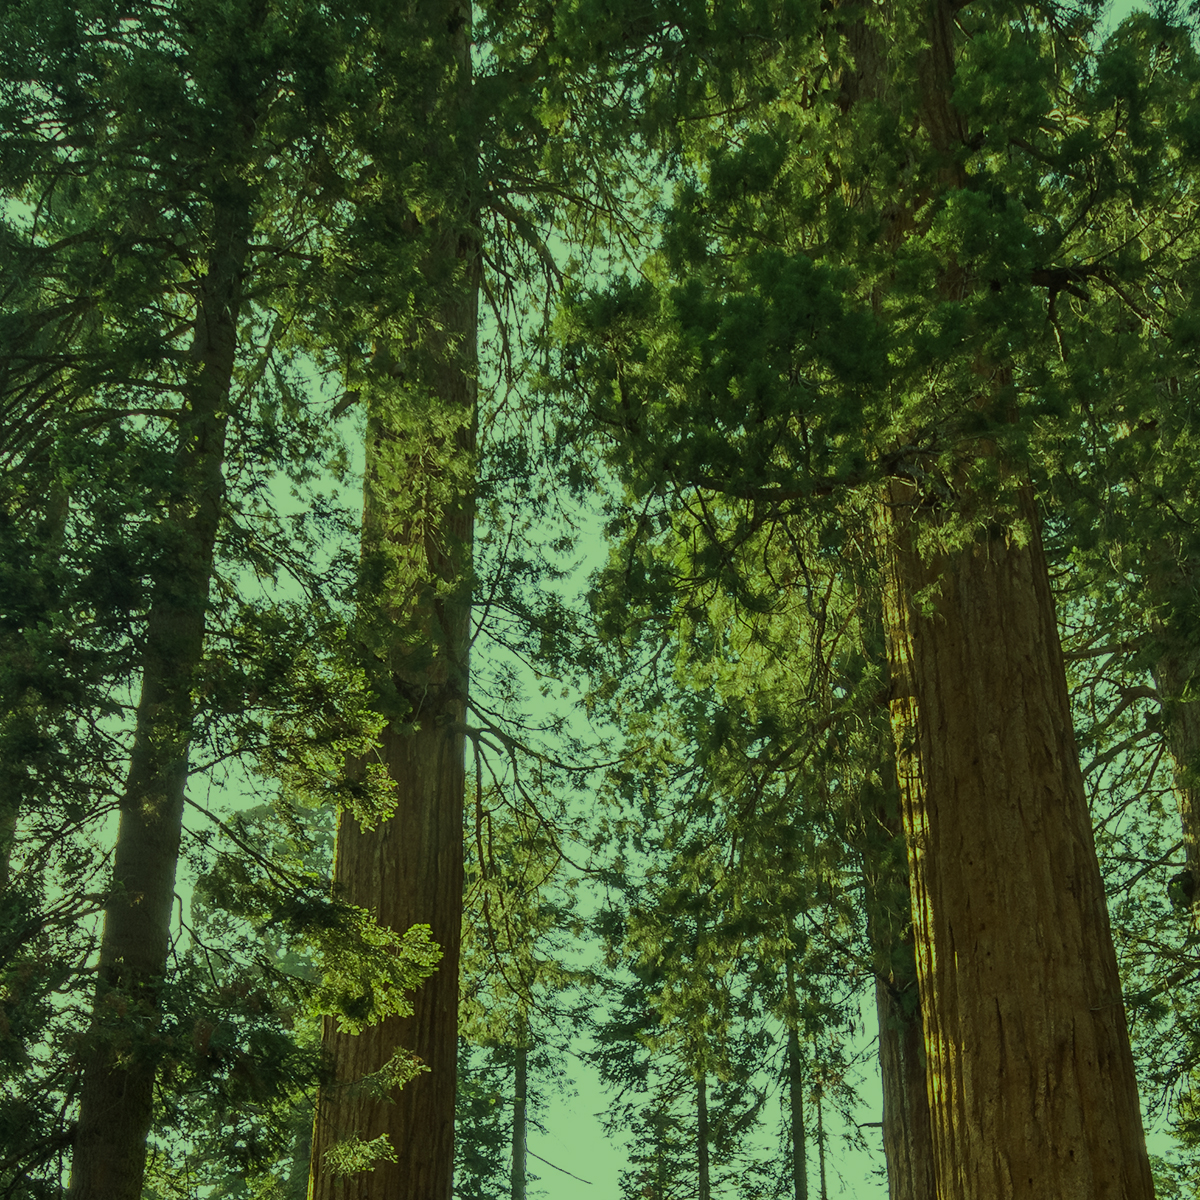 Trees at Sequoia National Park